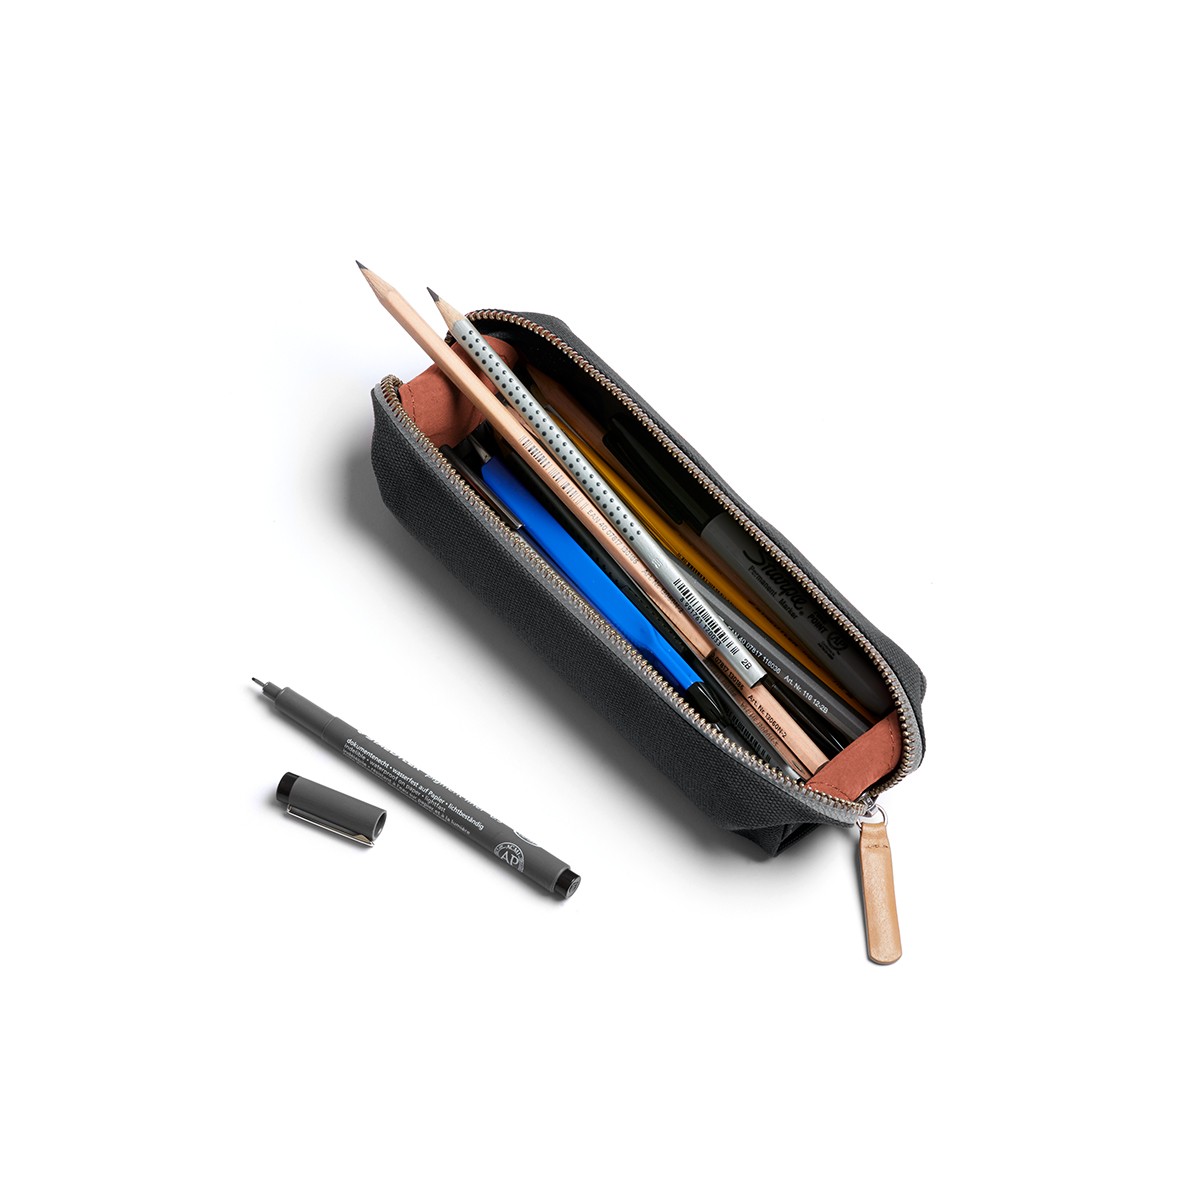 pens, cables, stationery and personal items Marca: BellroyBellroy Pencil Case business accessories - Bronze 